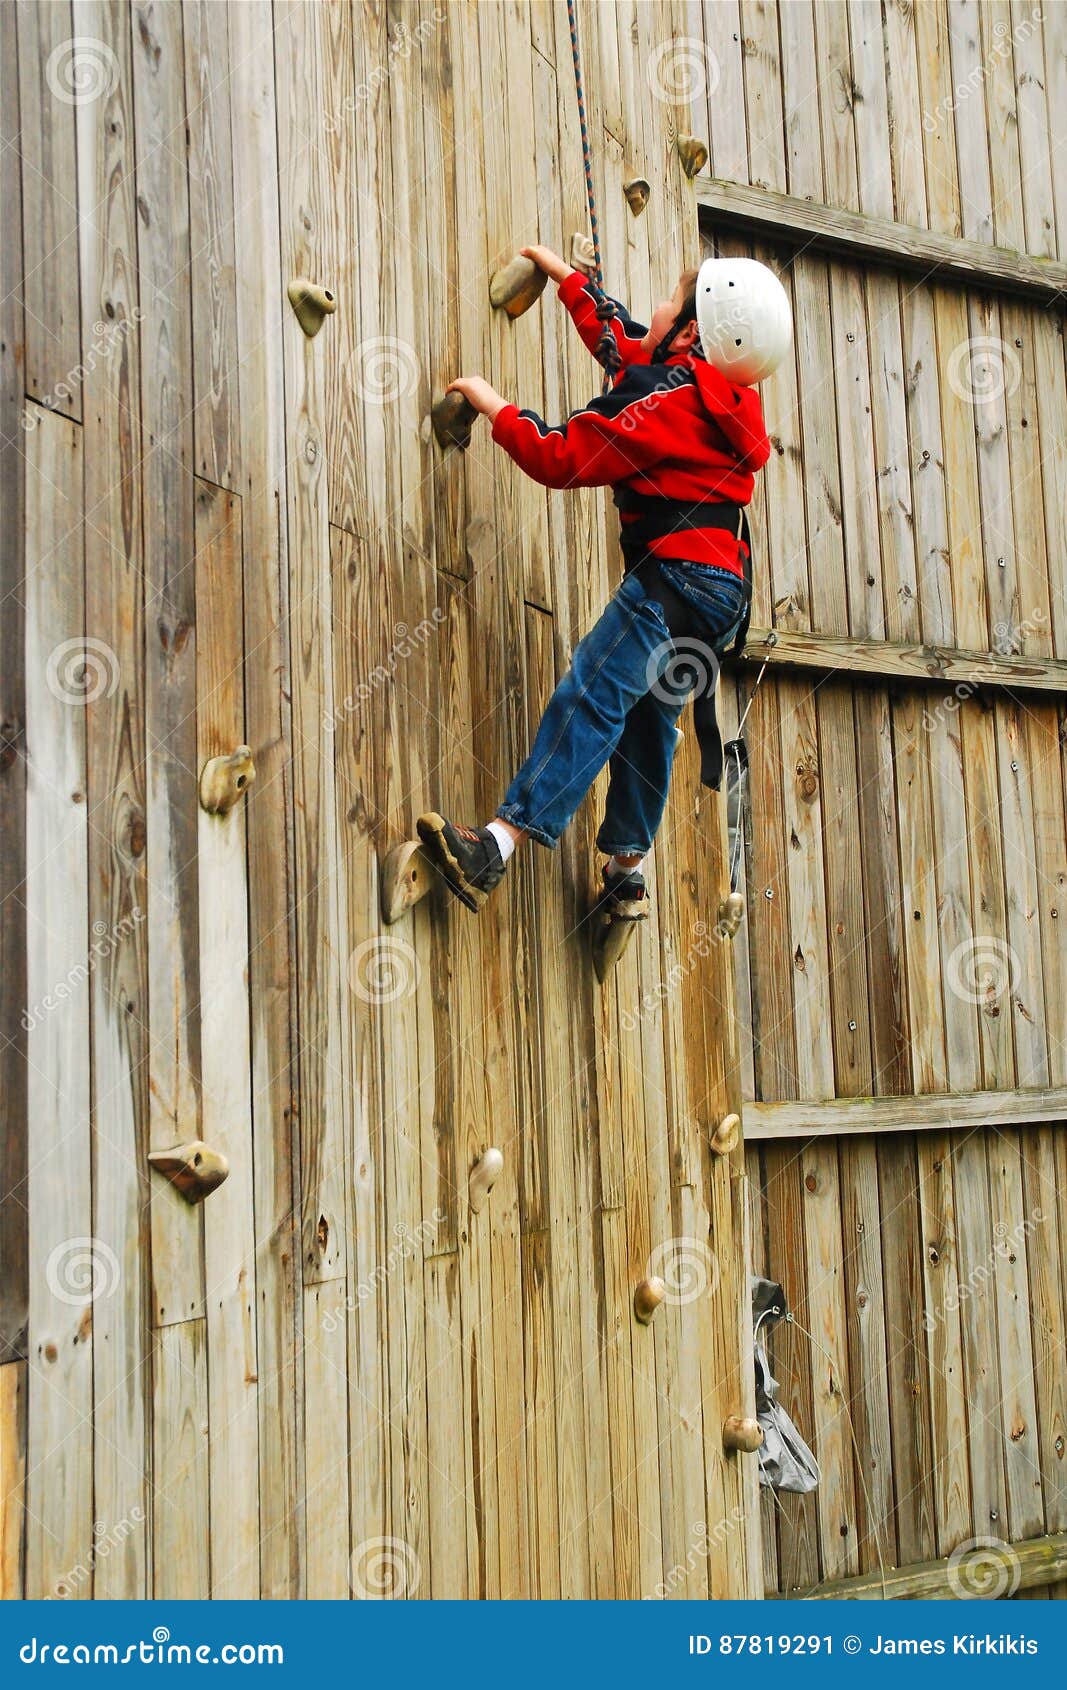 Rock Wall Challenge stock image. Image of exterior, camp - 87819291